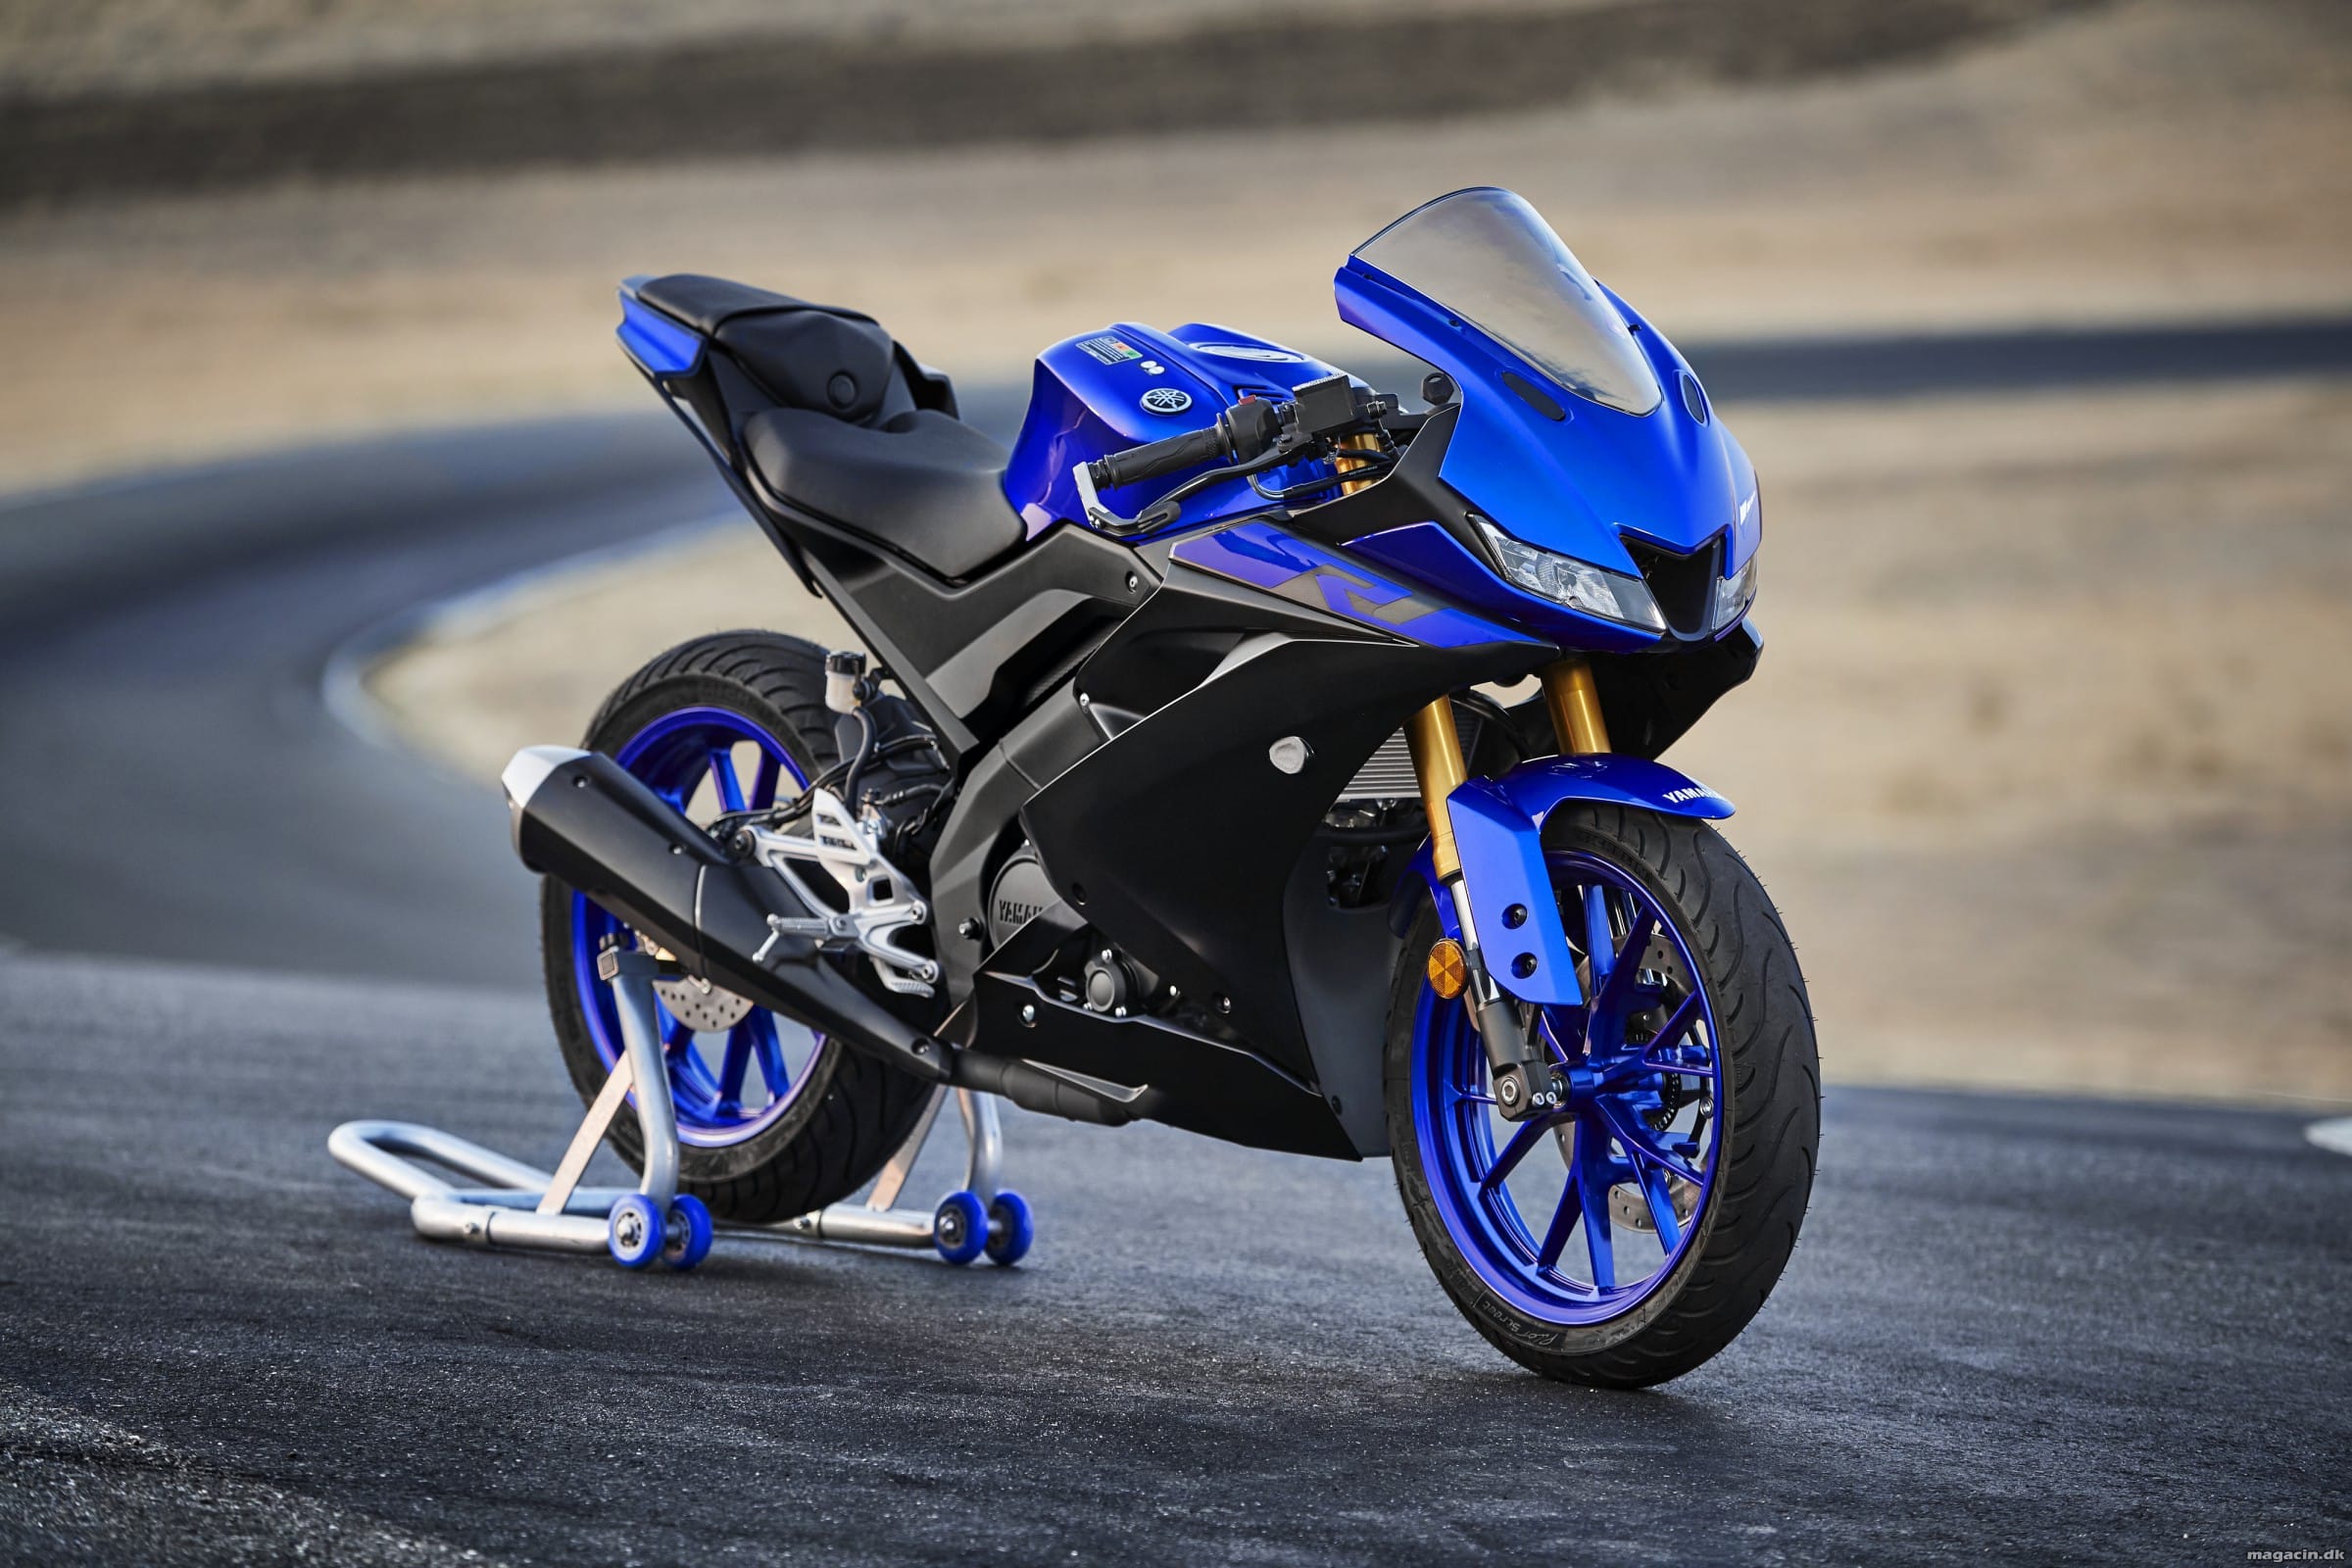 Højdepunkter for ny YZF-R125